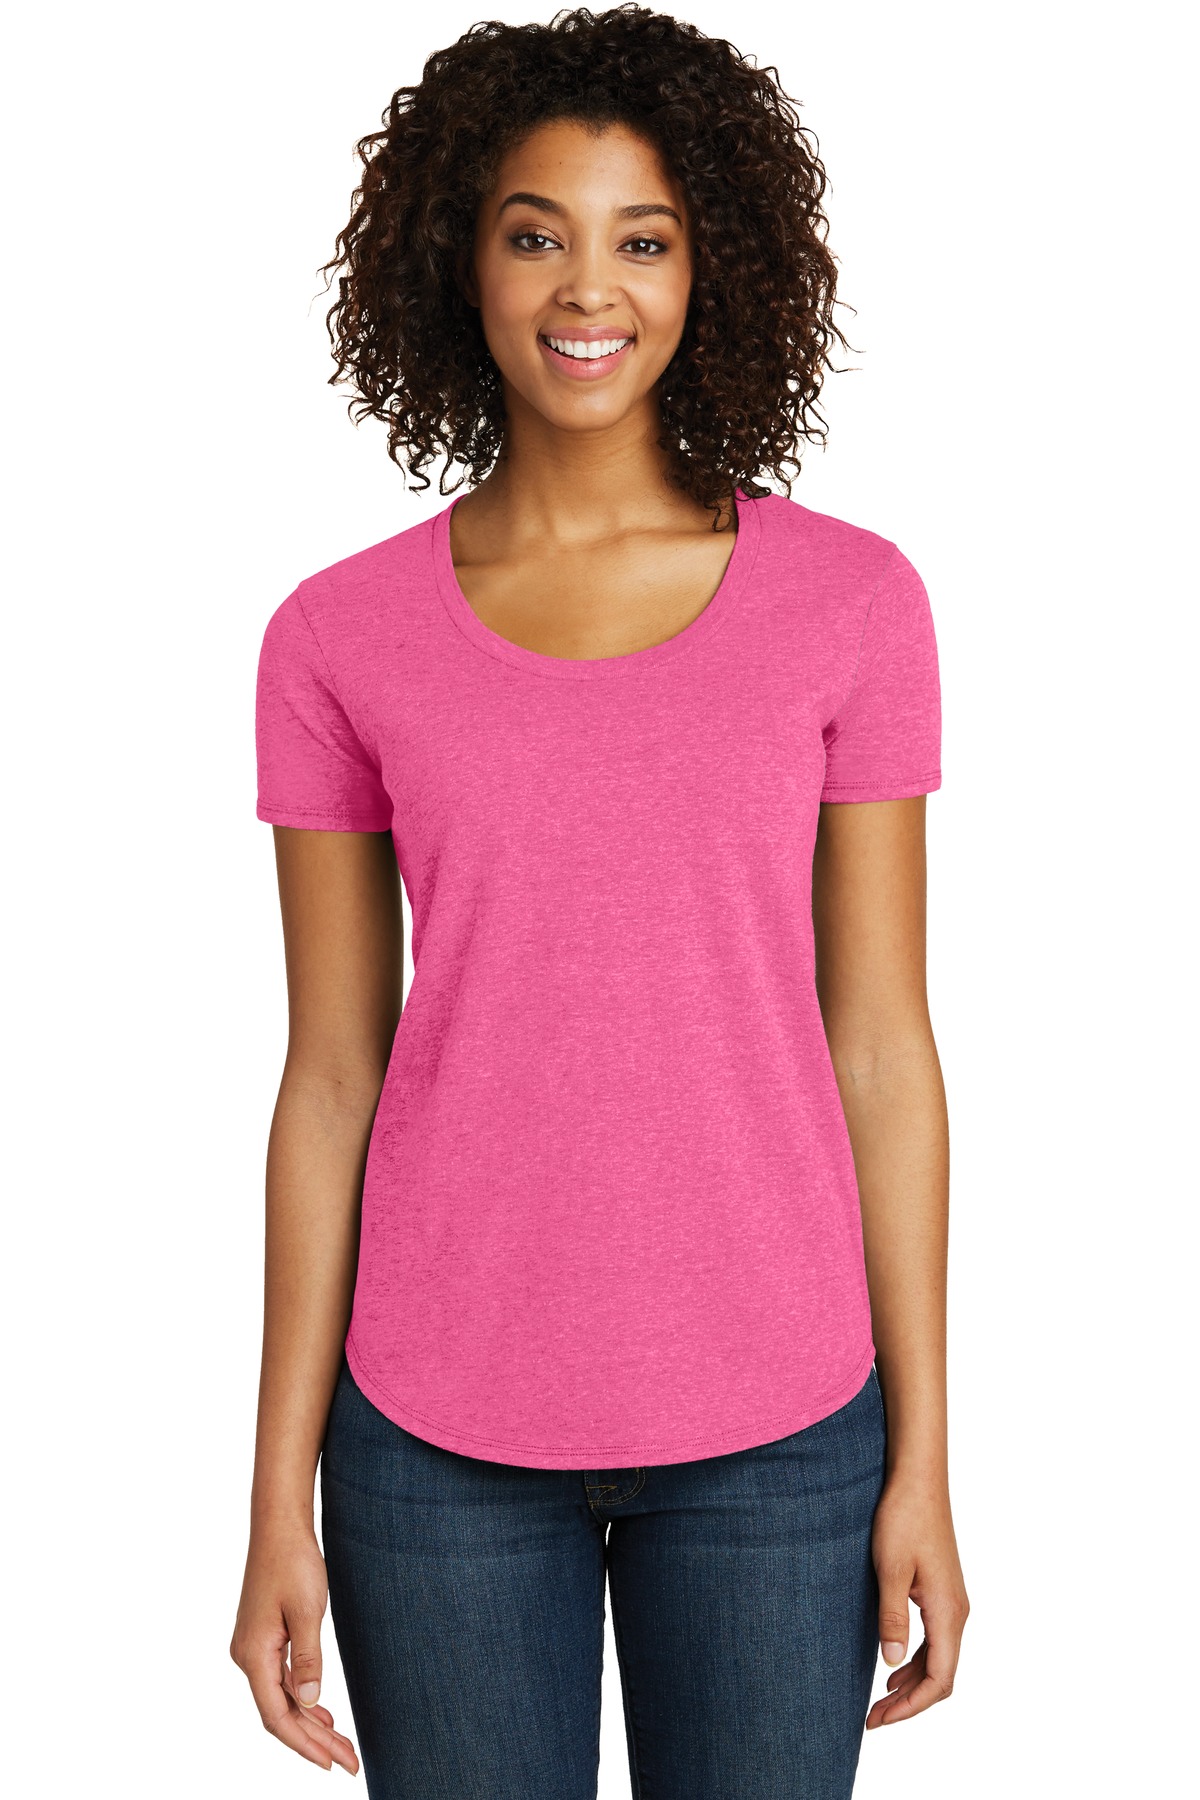 District DT6401  Women's Fitted Very Important Tee ® Scoop Neck